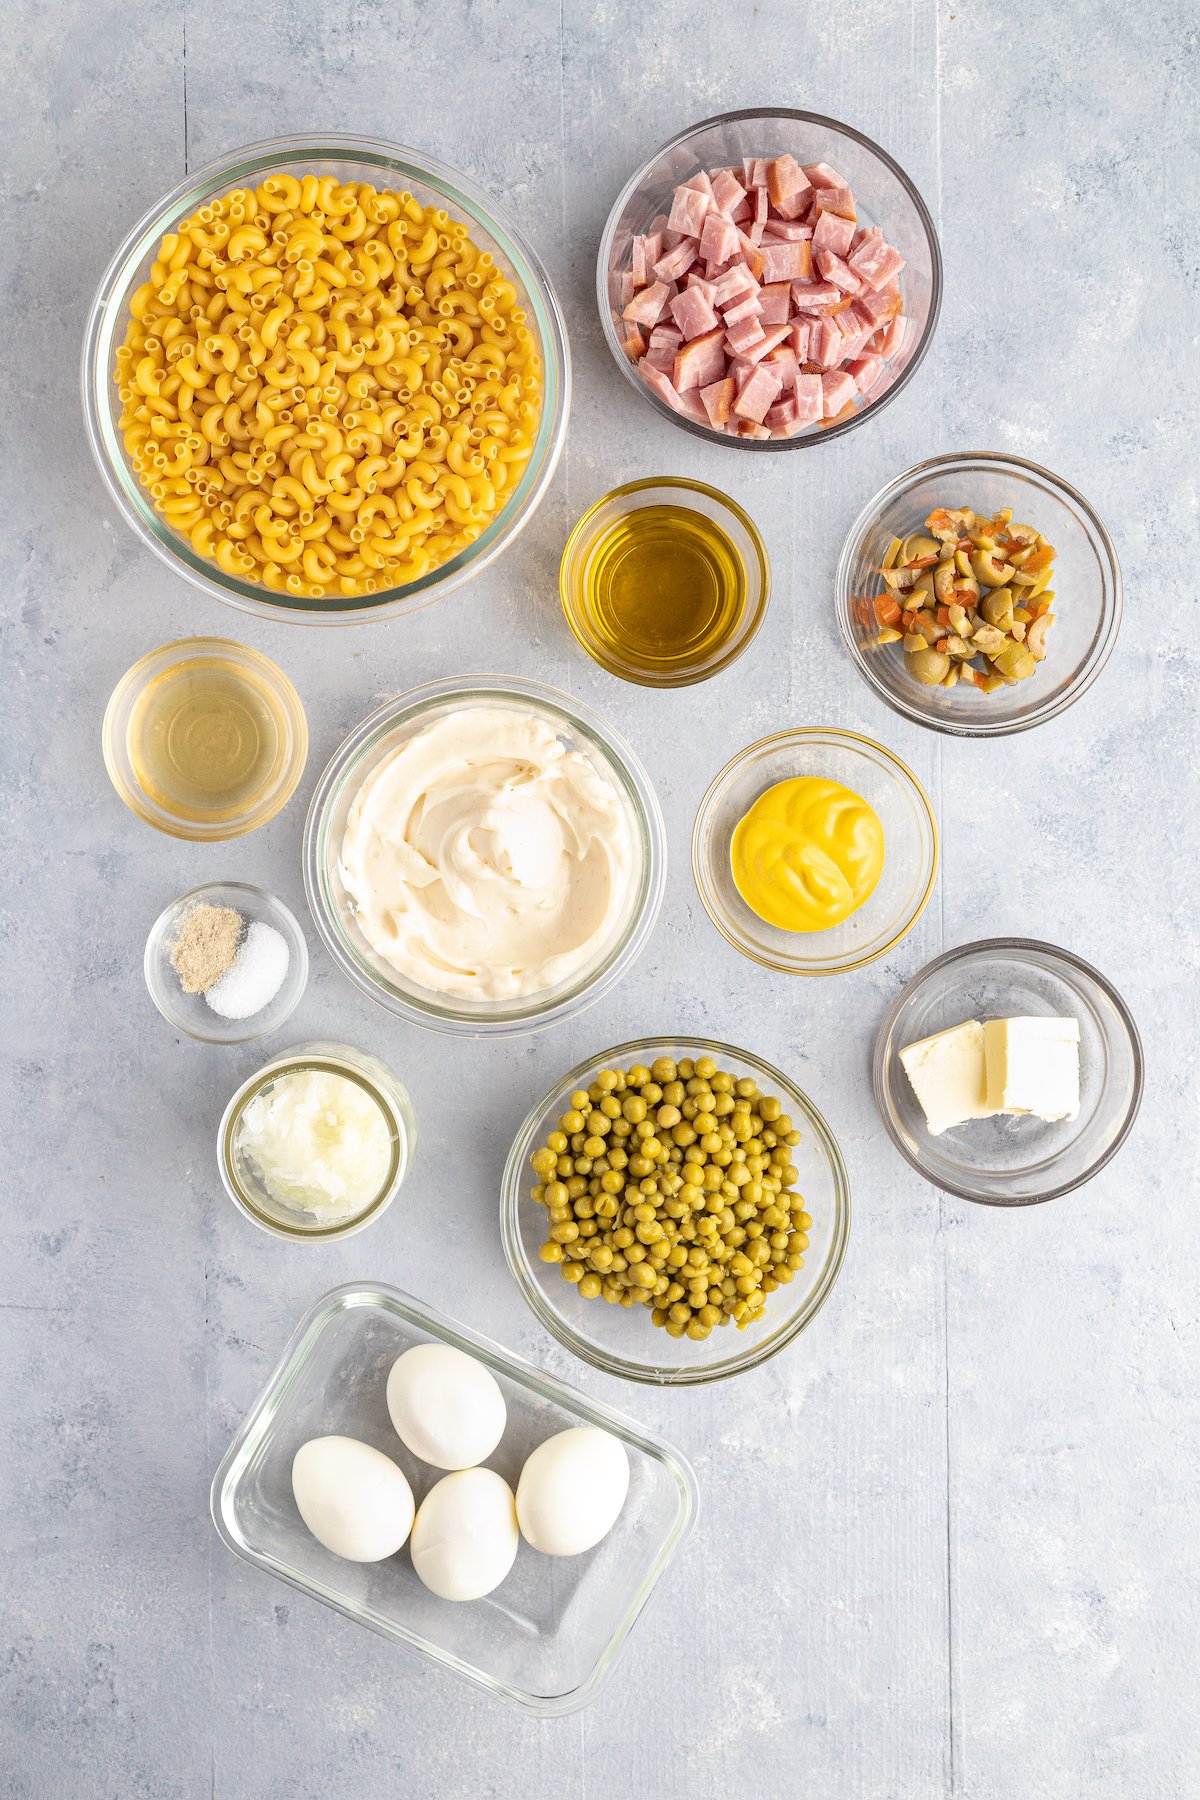 From top left: Elbow pasta, chopped ham, pimiento juice, olive oil, sliced olives, mayonnaise, mustard, salt and white pepper, grated onion, peas, butter, hard boiled eggs.